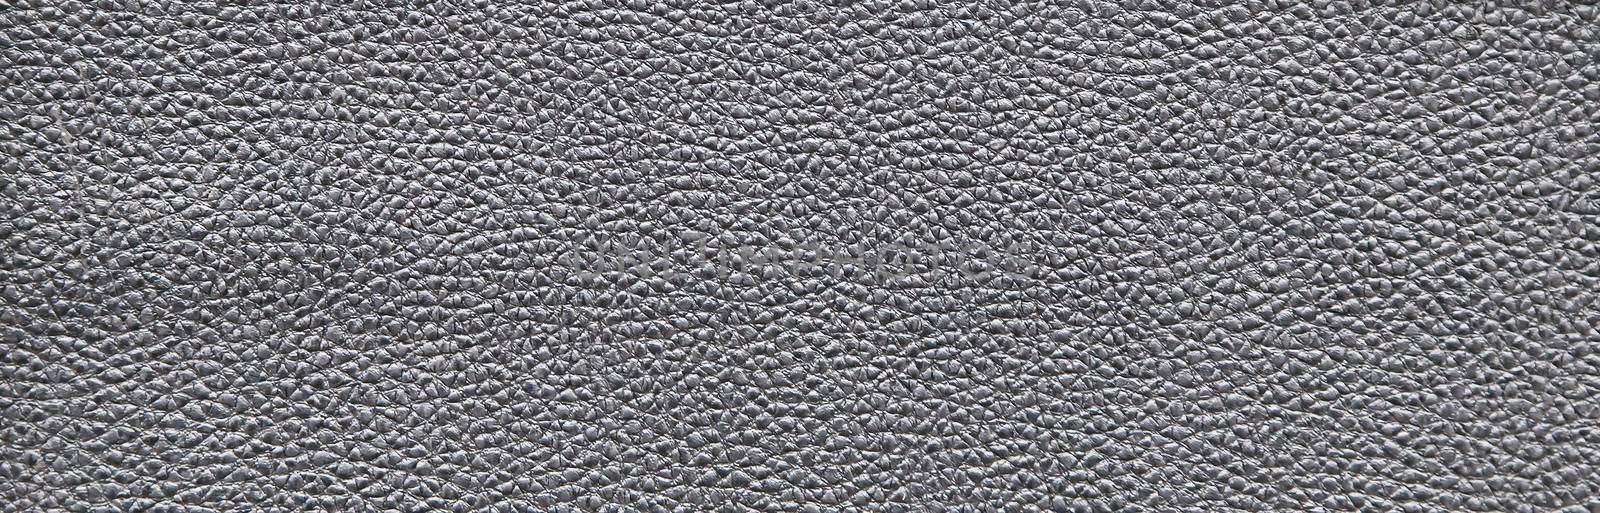 Dark gray abstract rough decorative texture imitating leather. Textured paper with copy space. Graphite color paper surface, texture closeup.